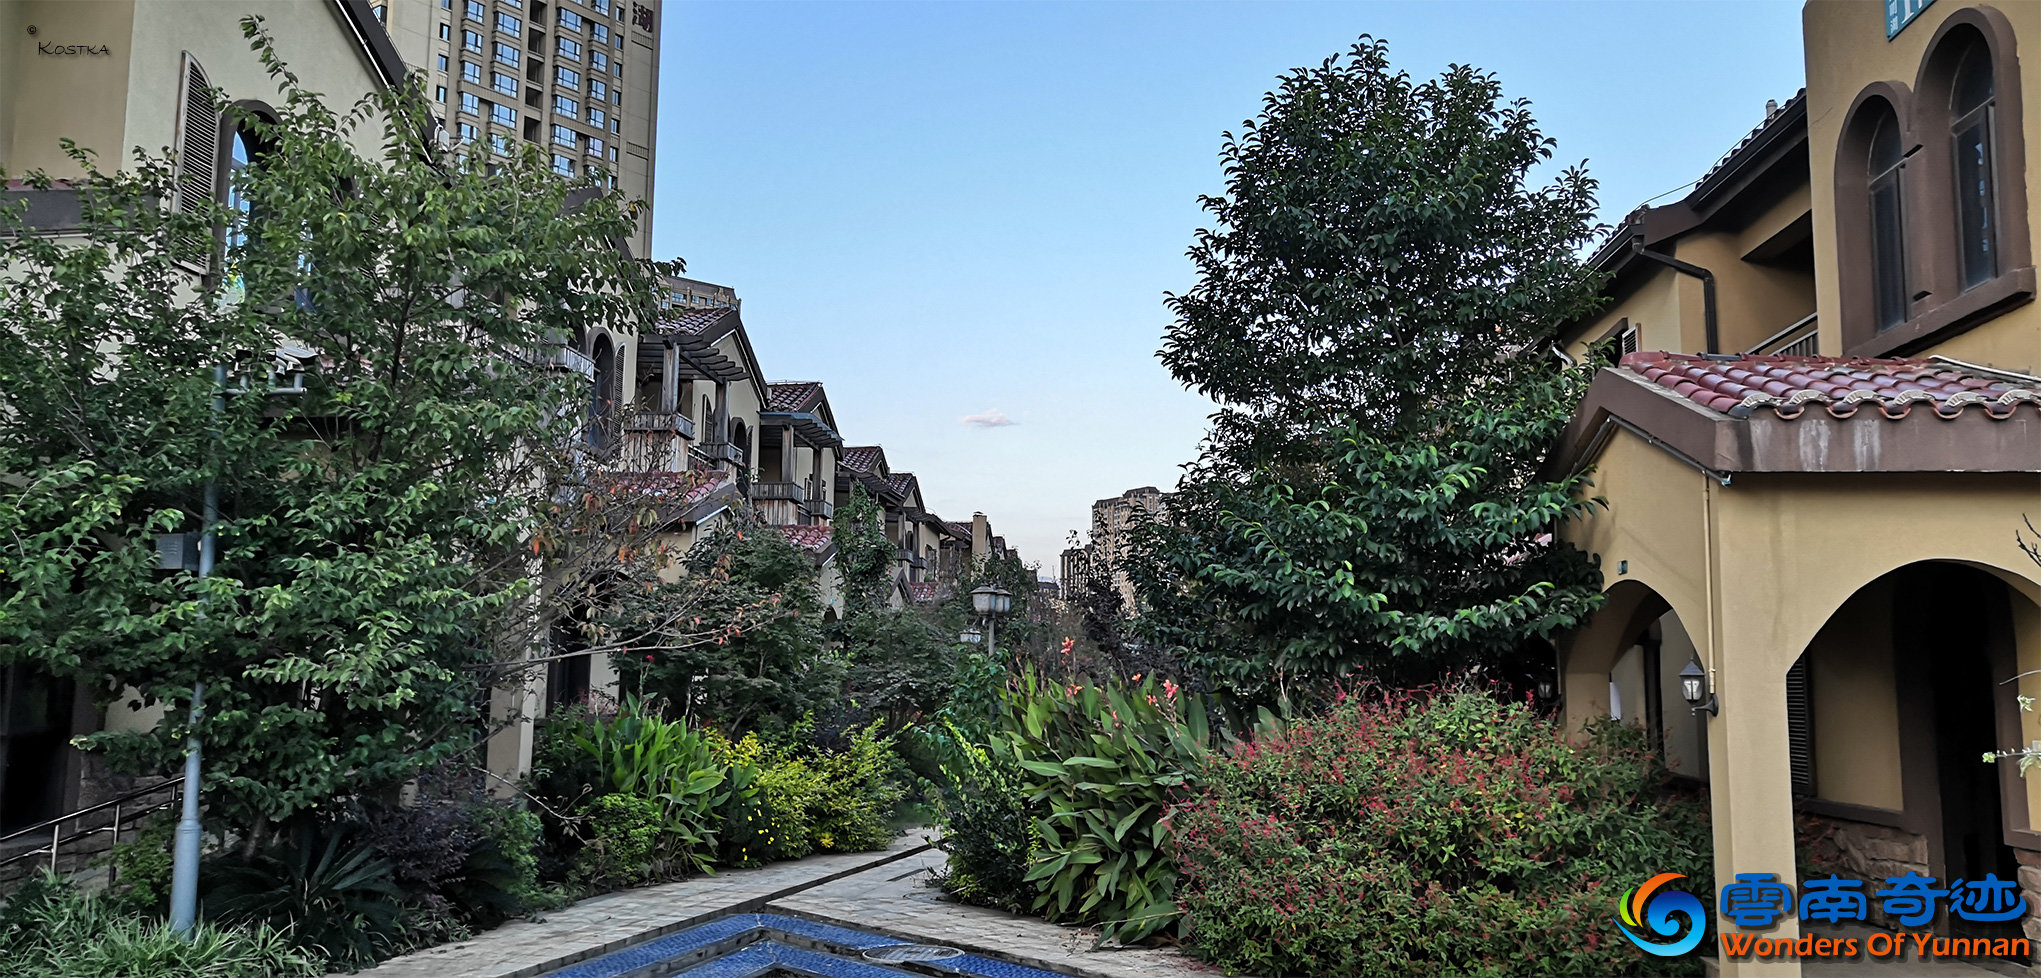 Behind the buildings of Pan Jiang Xi Lu with beautiful gardens covered with flowers, trees and plants